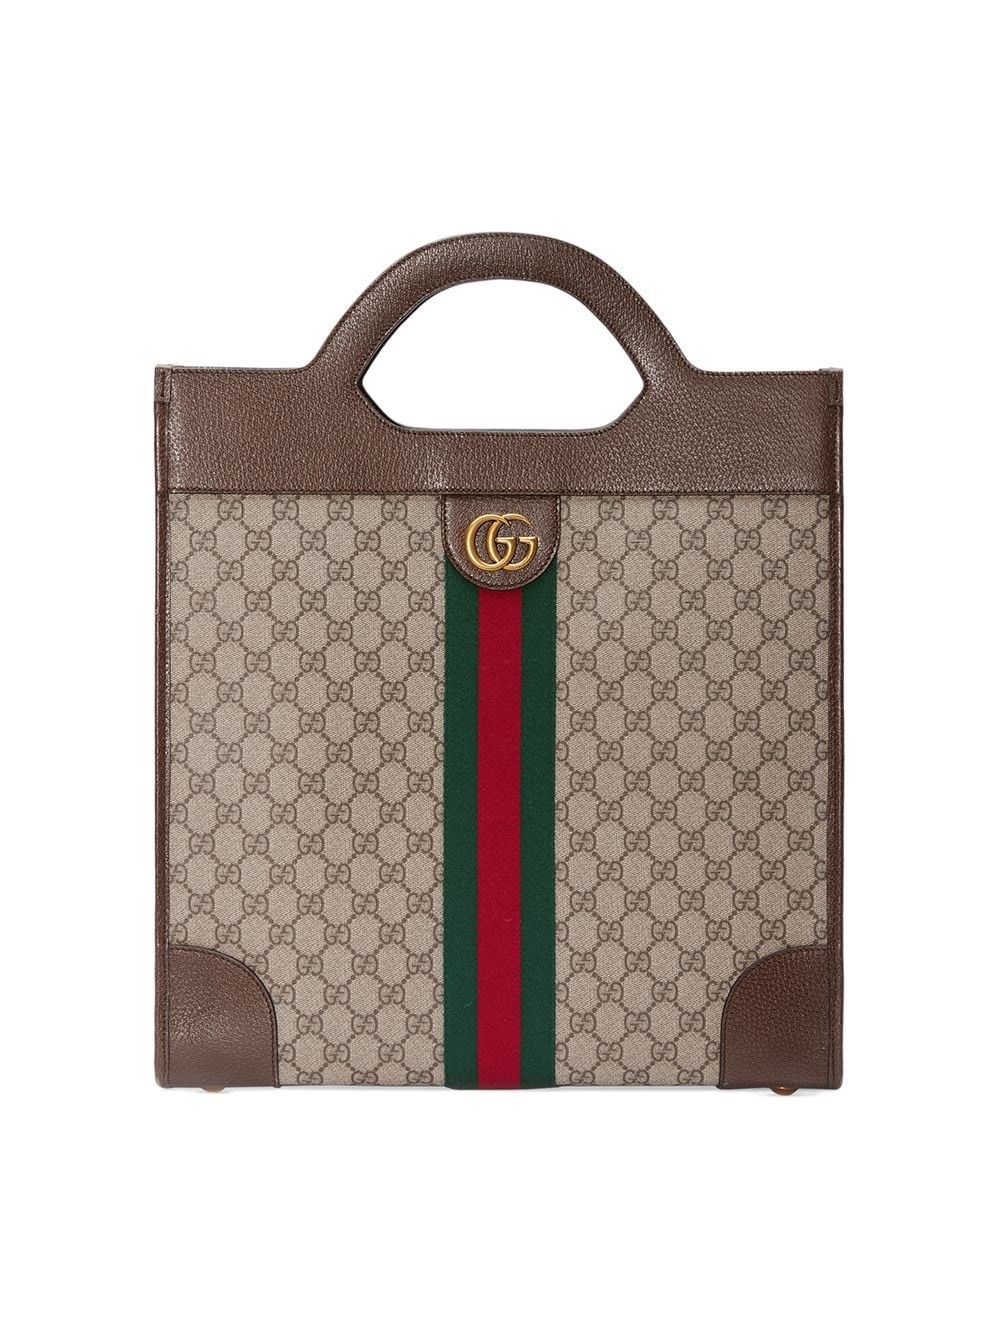 gucci GG PRINT TOTE BAG available on montiboutique.com - 25859